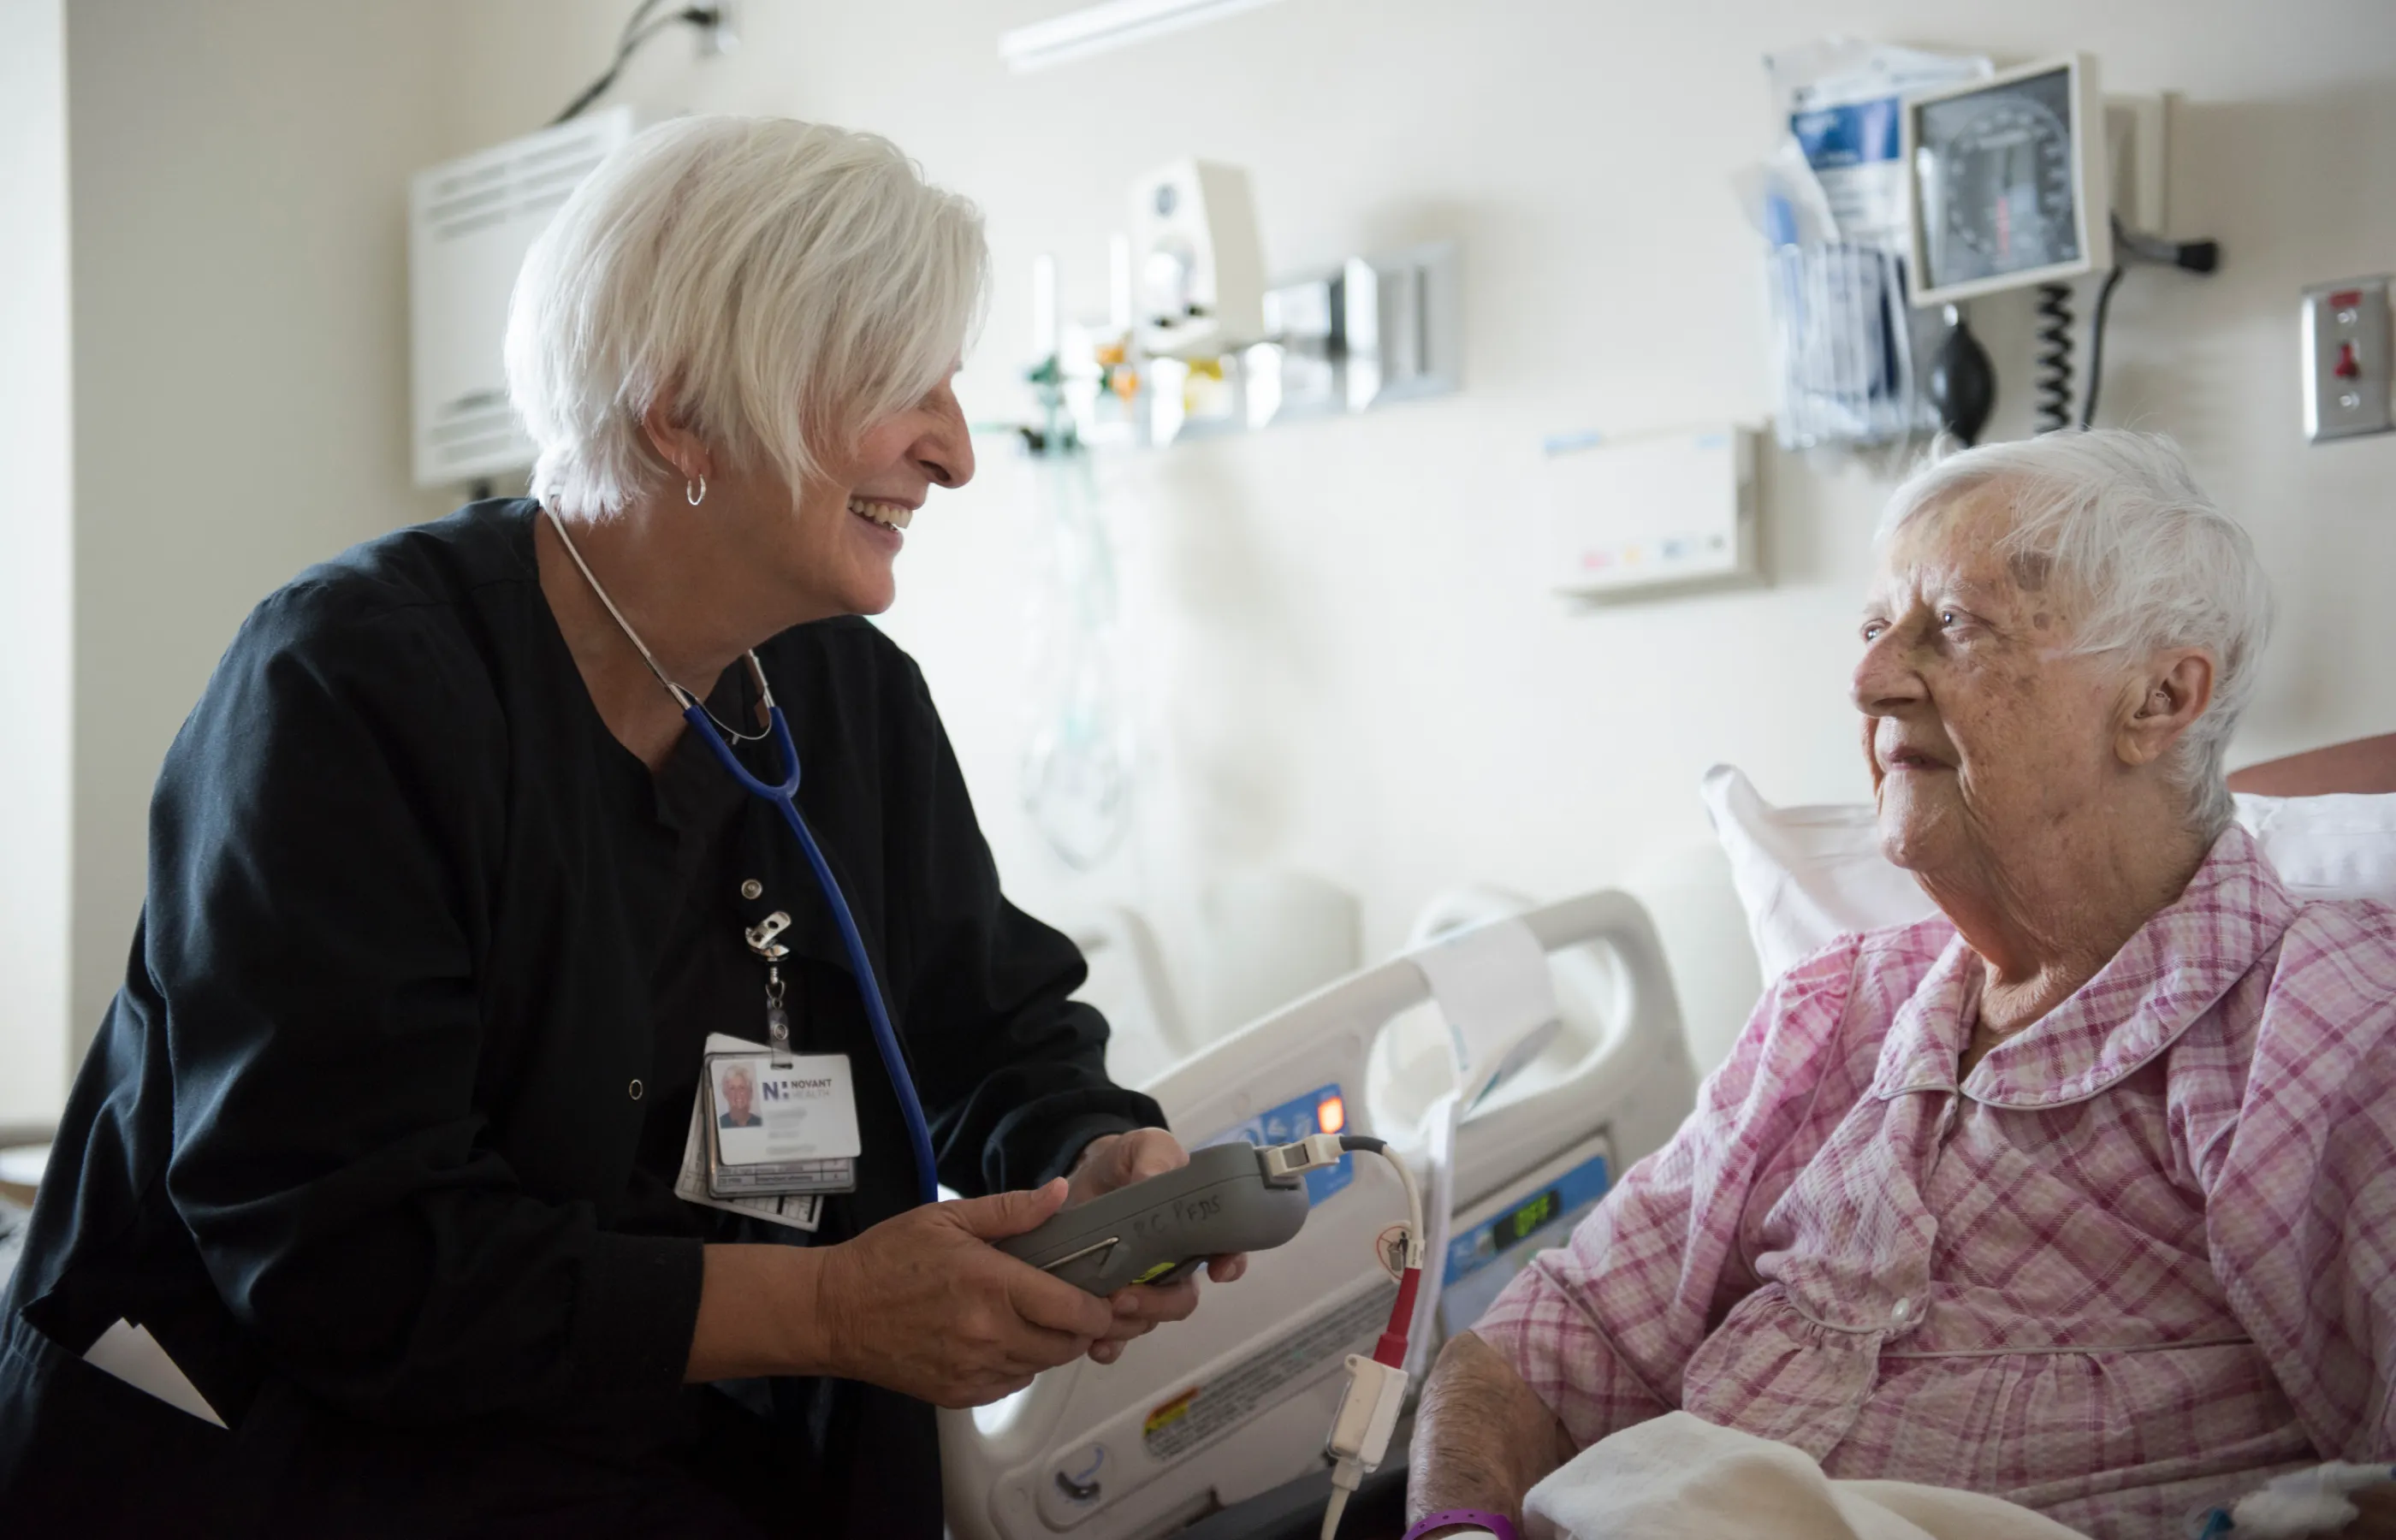 A Novant Health nurse is at the bedside of a senior patient. The nurse is smiling and talking with the patient as she holders a large medical devce in her hand.